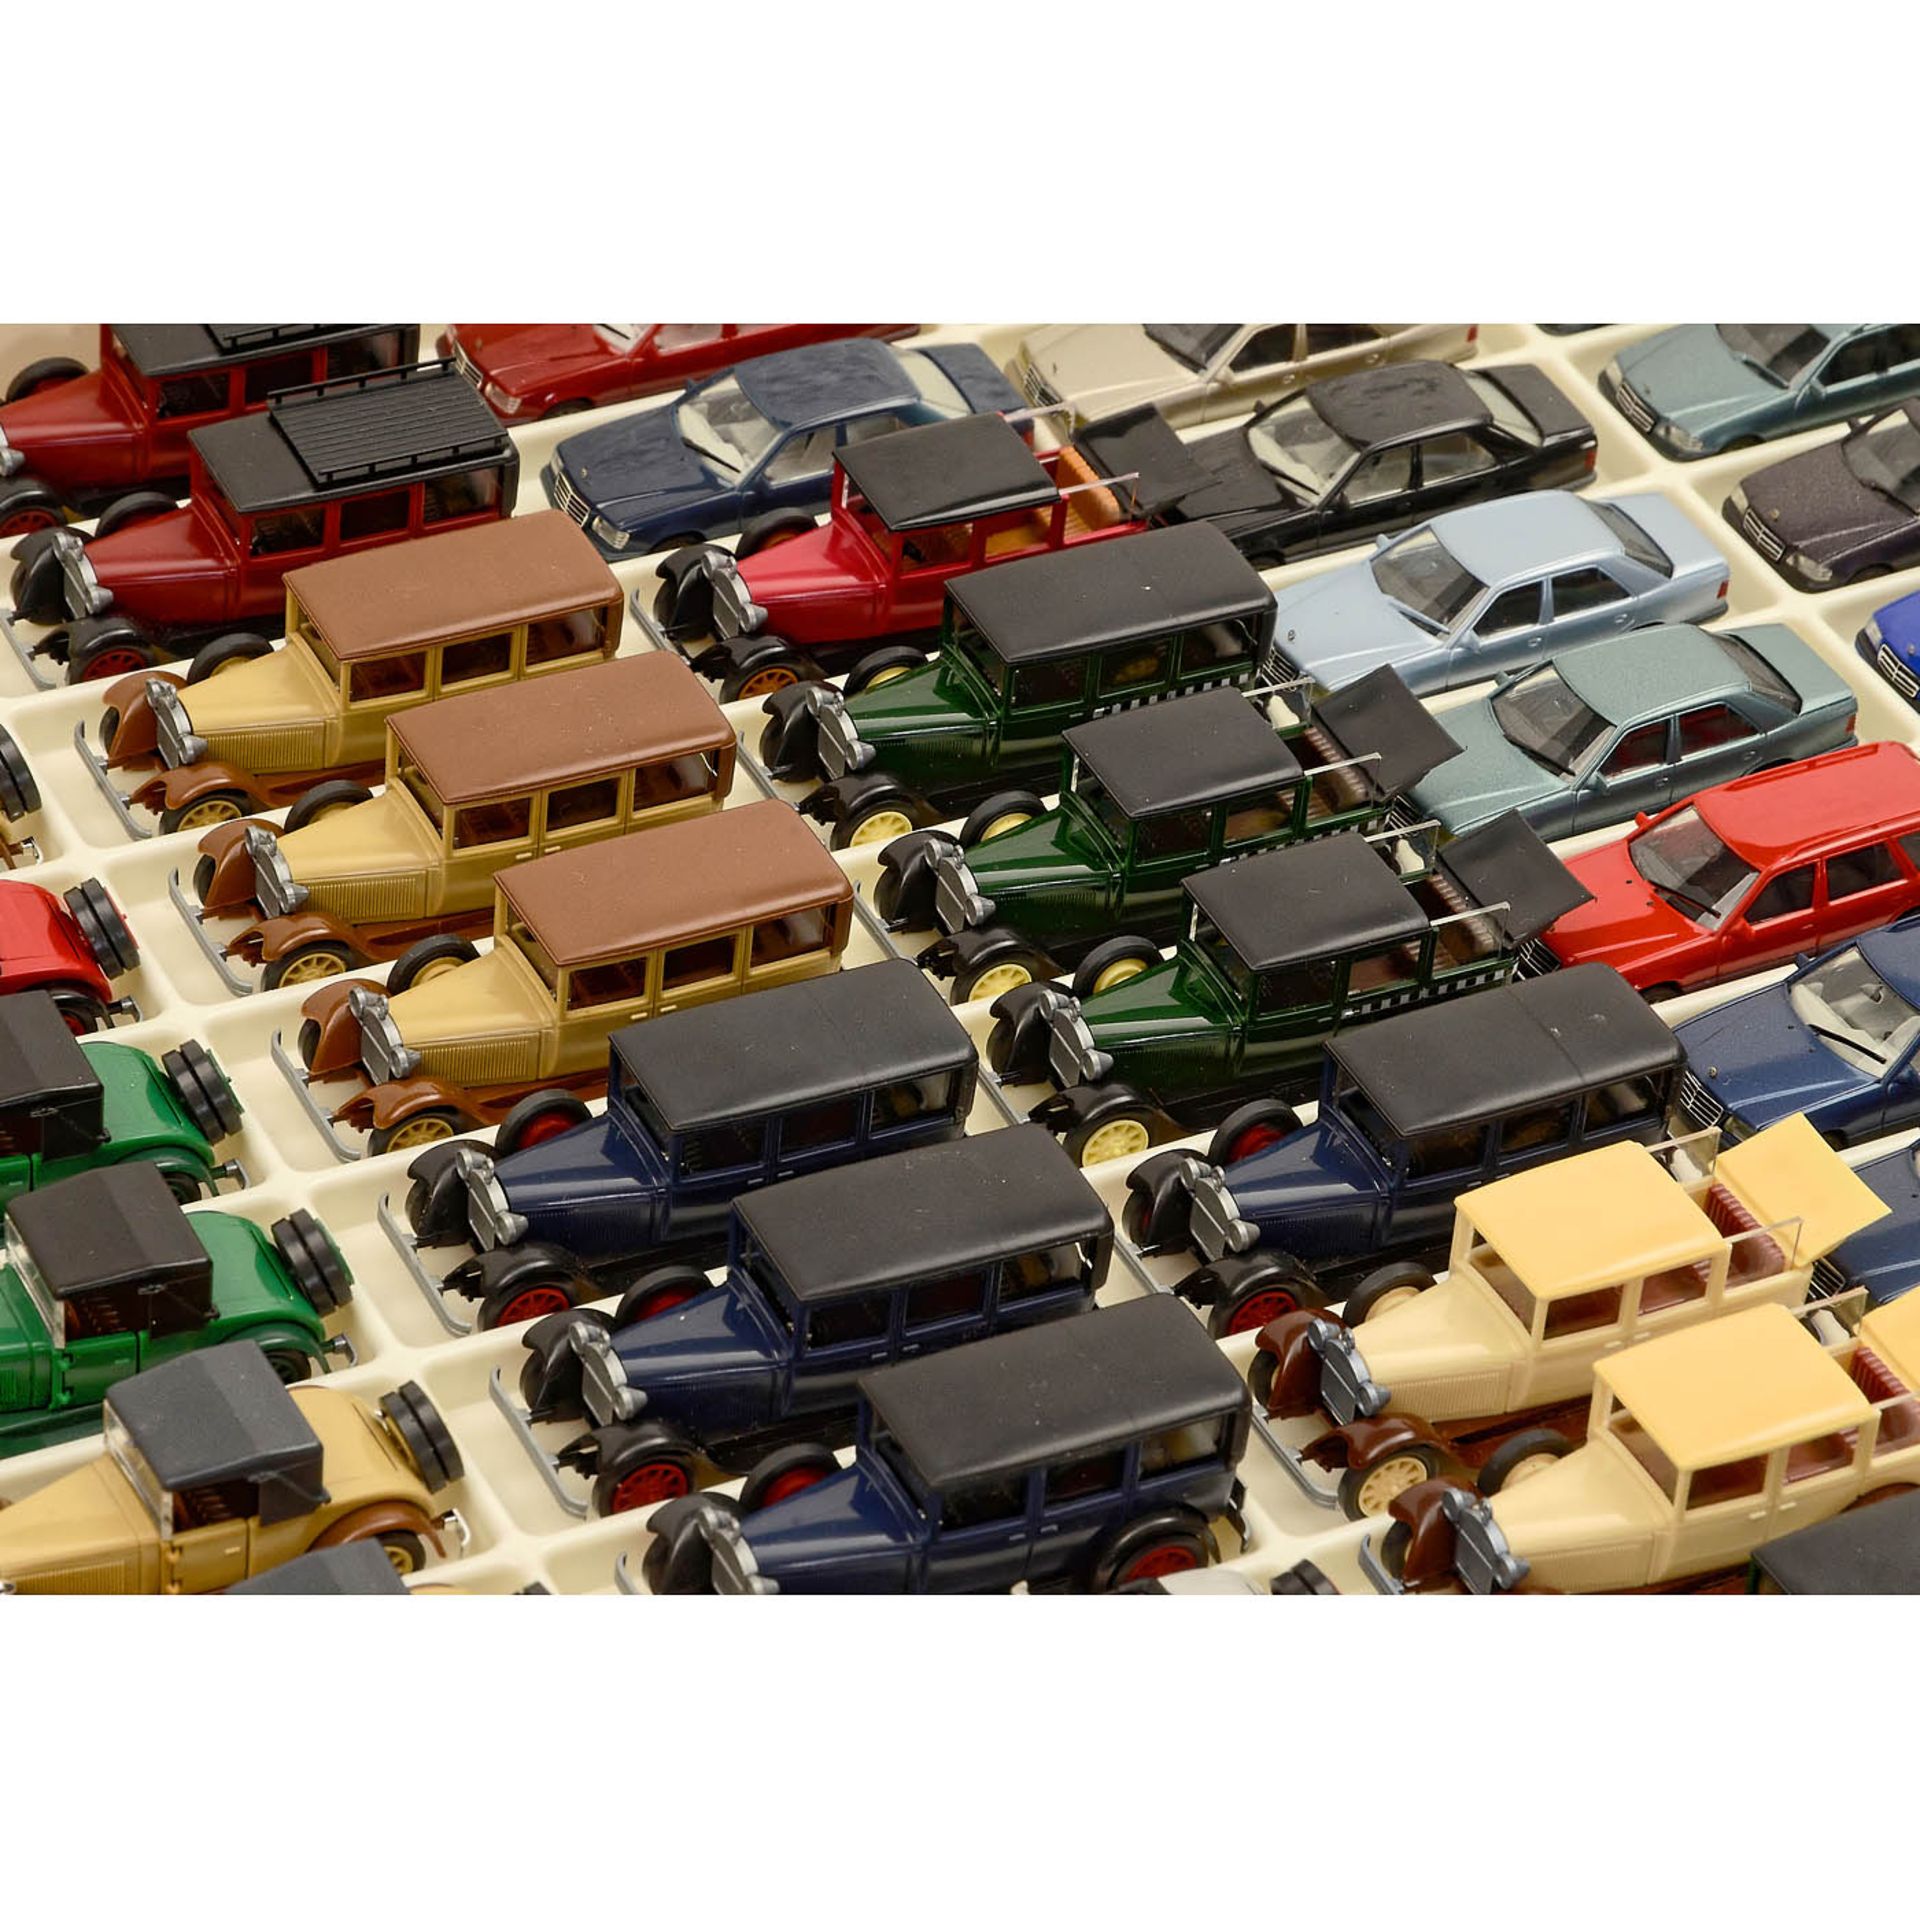 Large Collection of 1:87 Scale Model Cars - Image 2 of 9